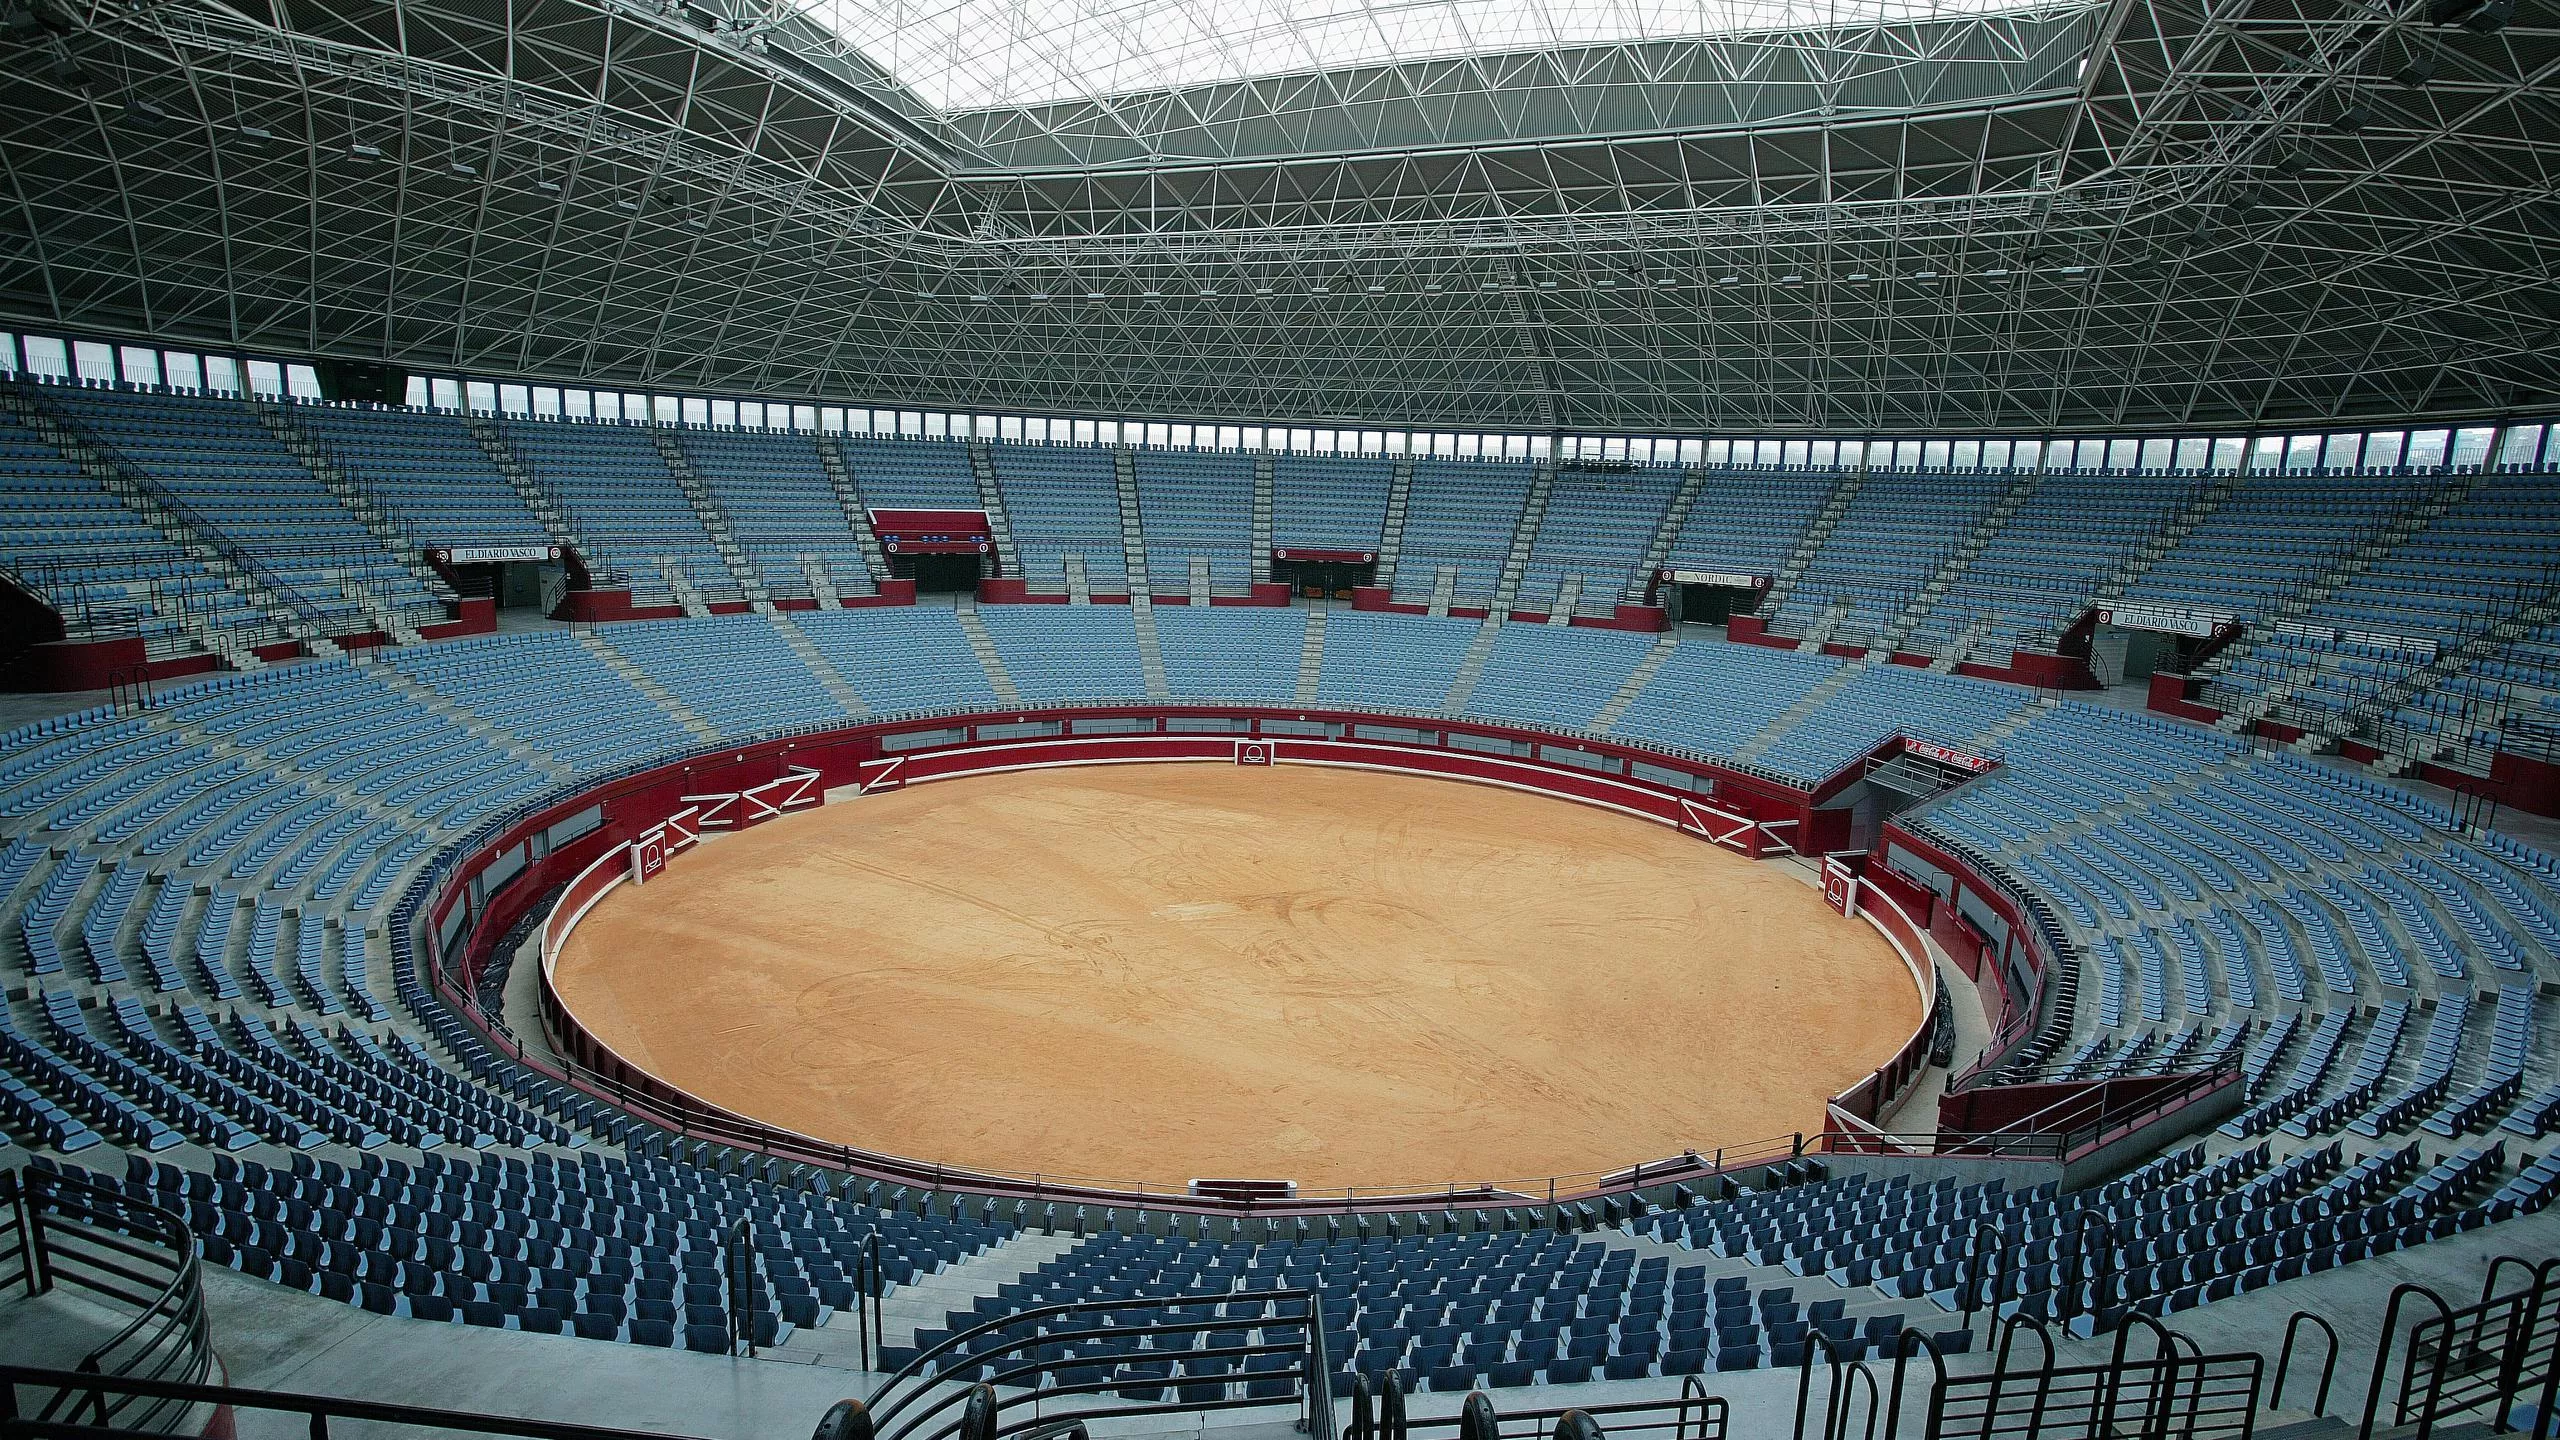 Plaza de Toros de Illumbe in Spain, Europe | Basketball,Authentic Experience - Rated 3.5